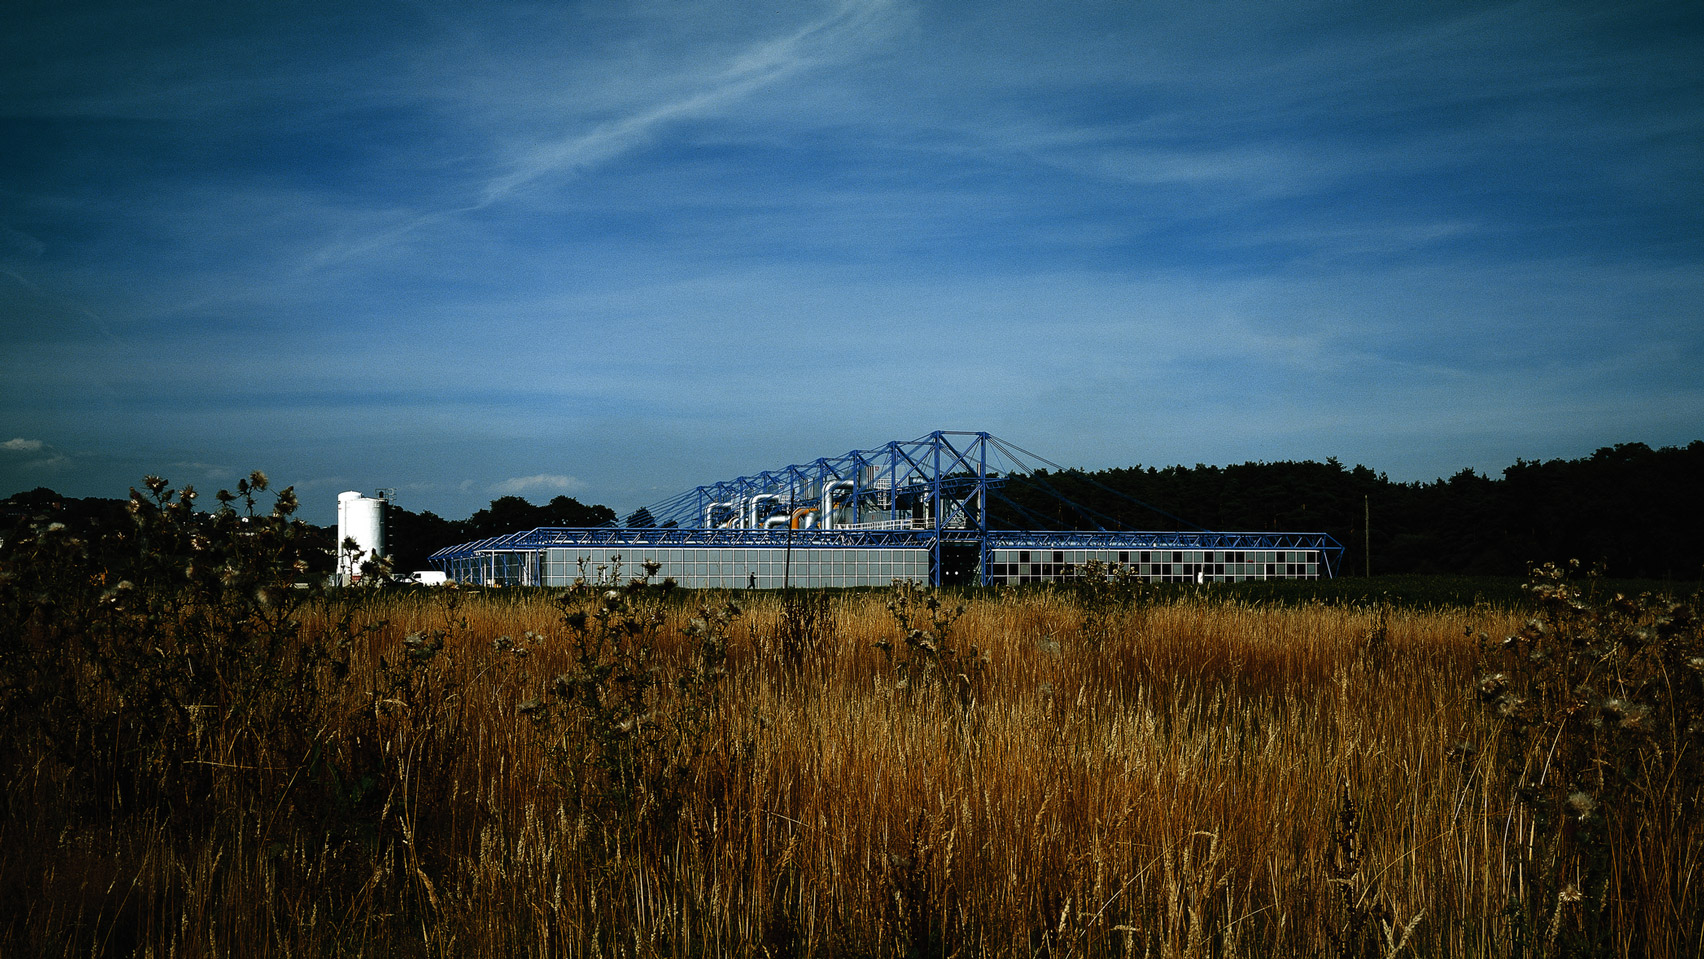 High-tech architecture: Inmos Microprocessor Factory in Wales by Richard Rogers